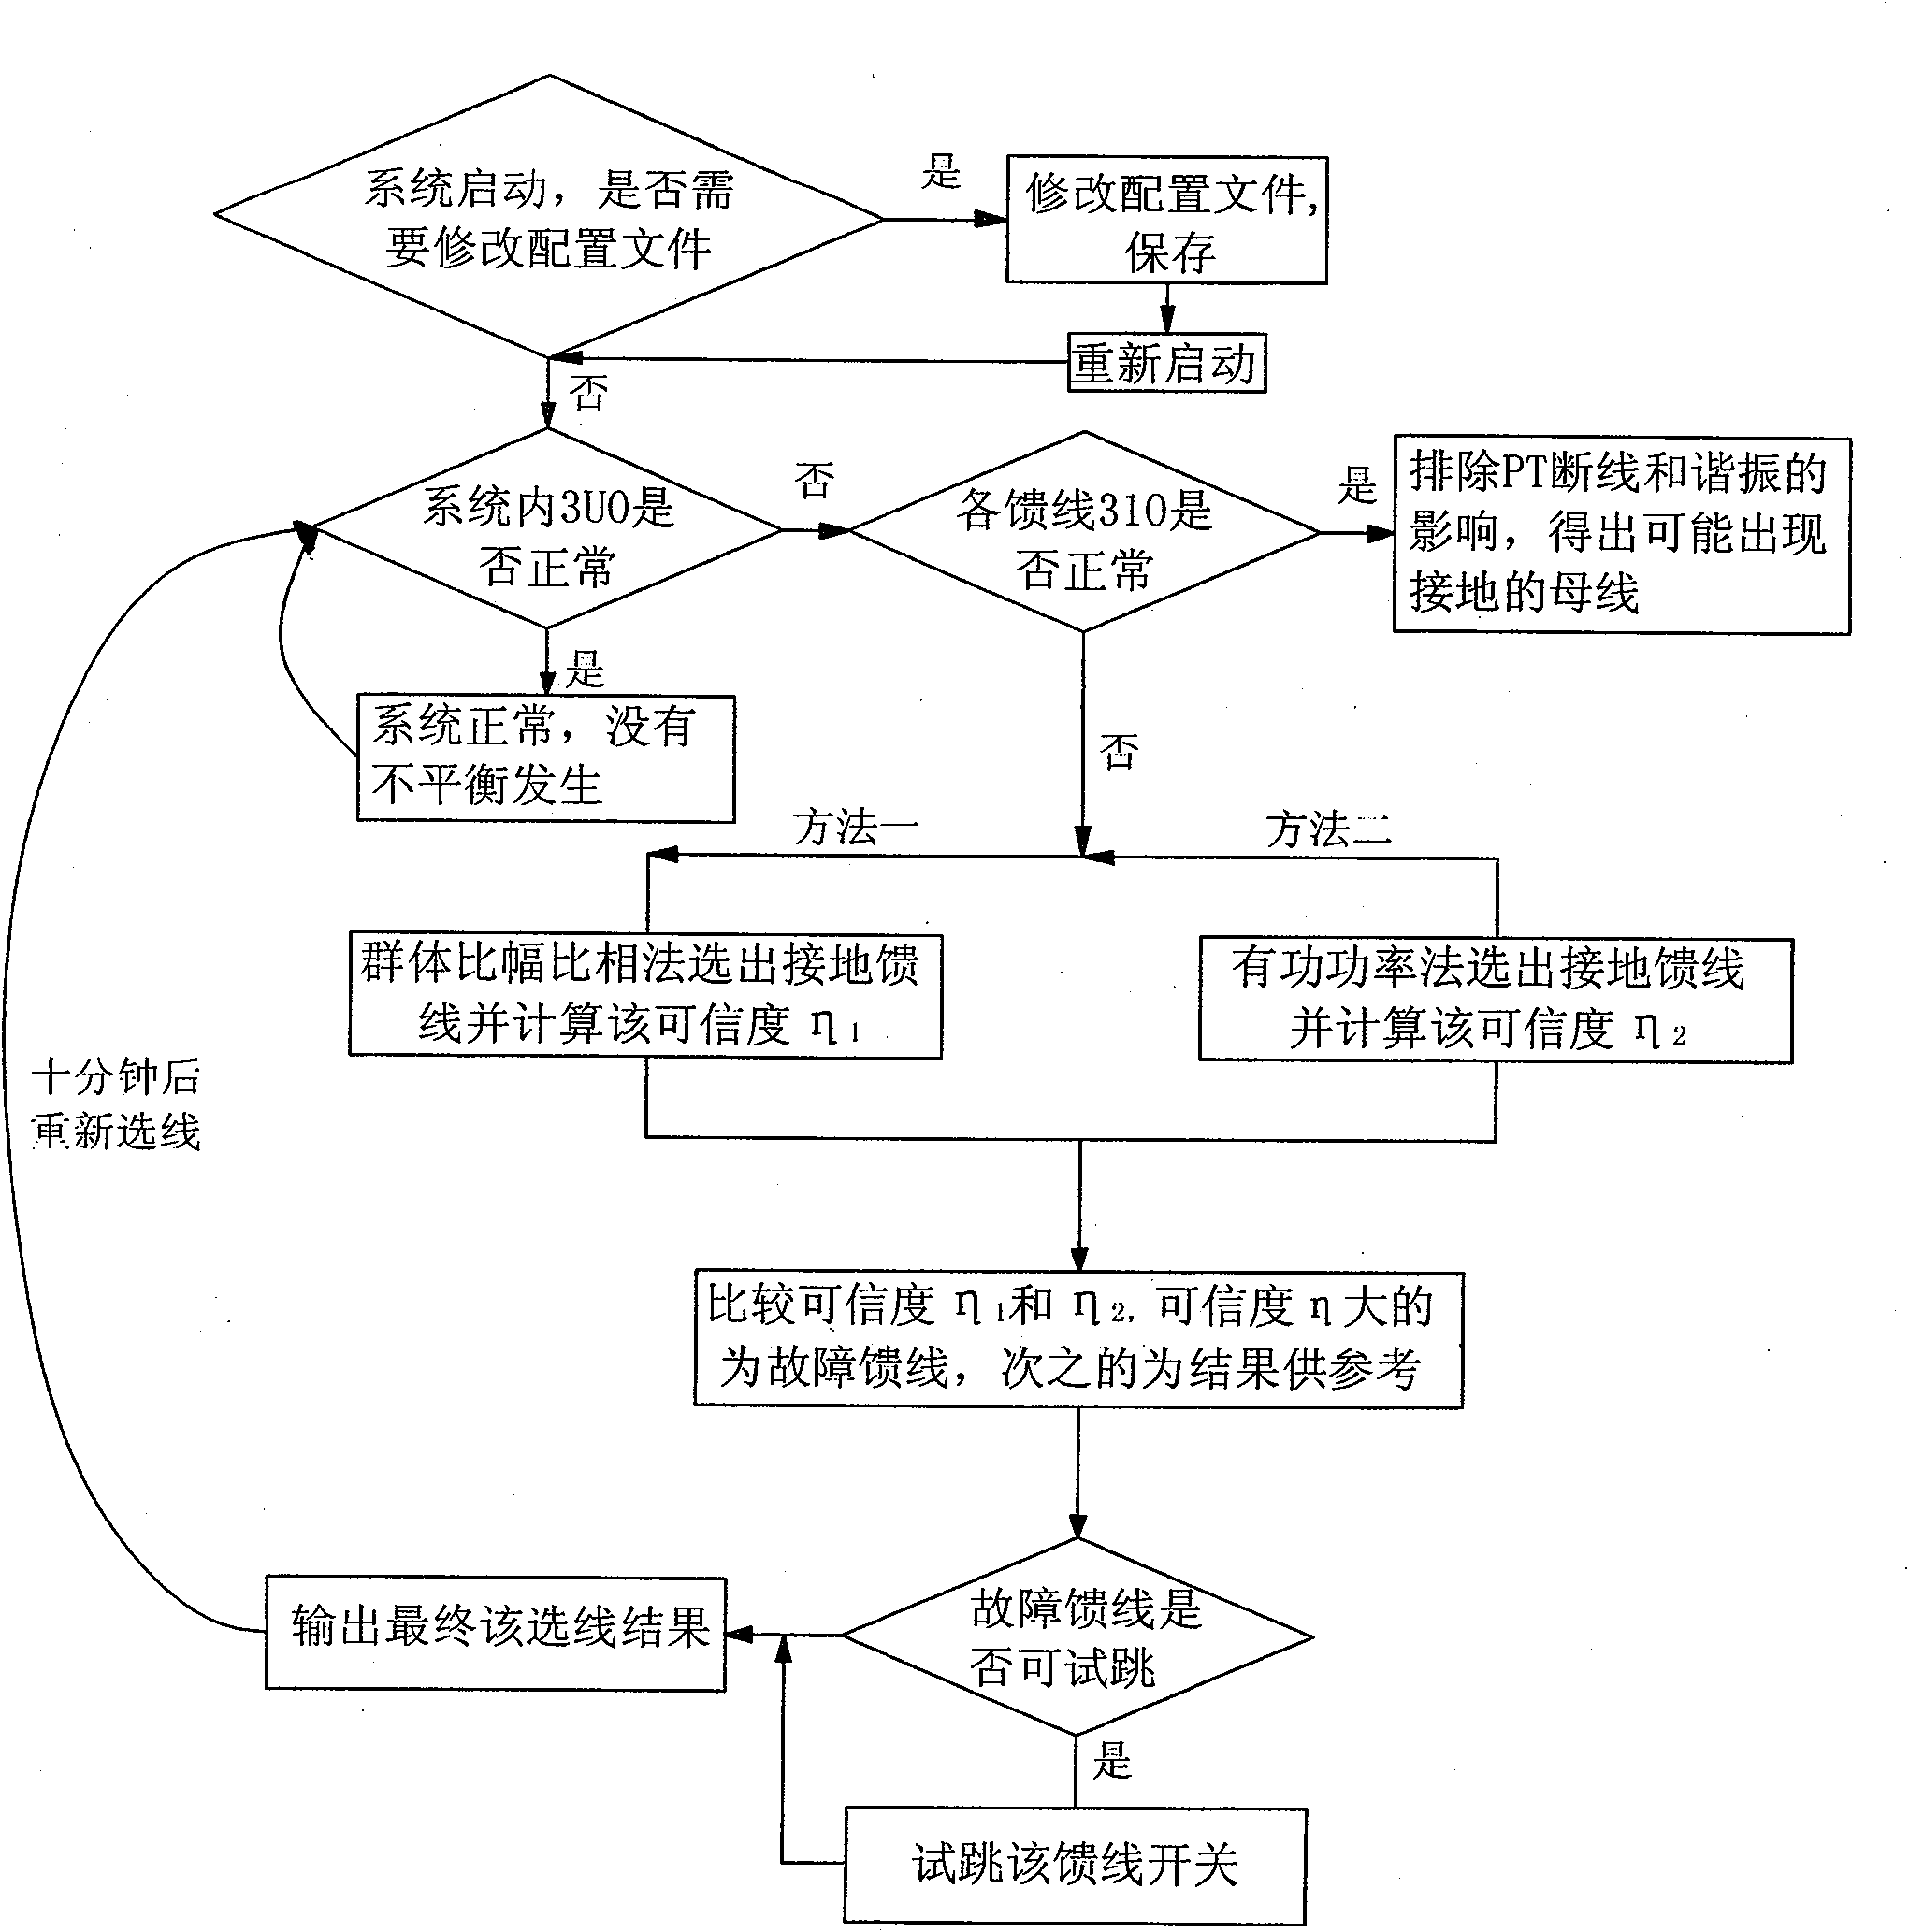 Small current grounding route selection method